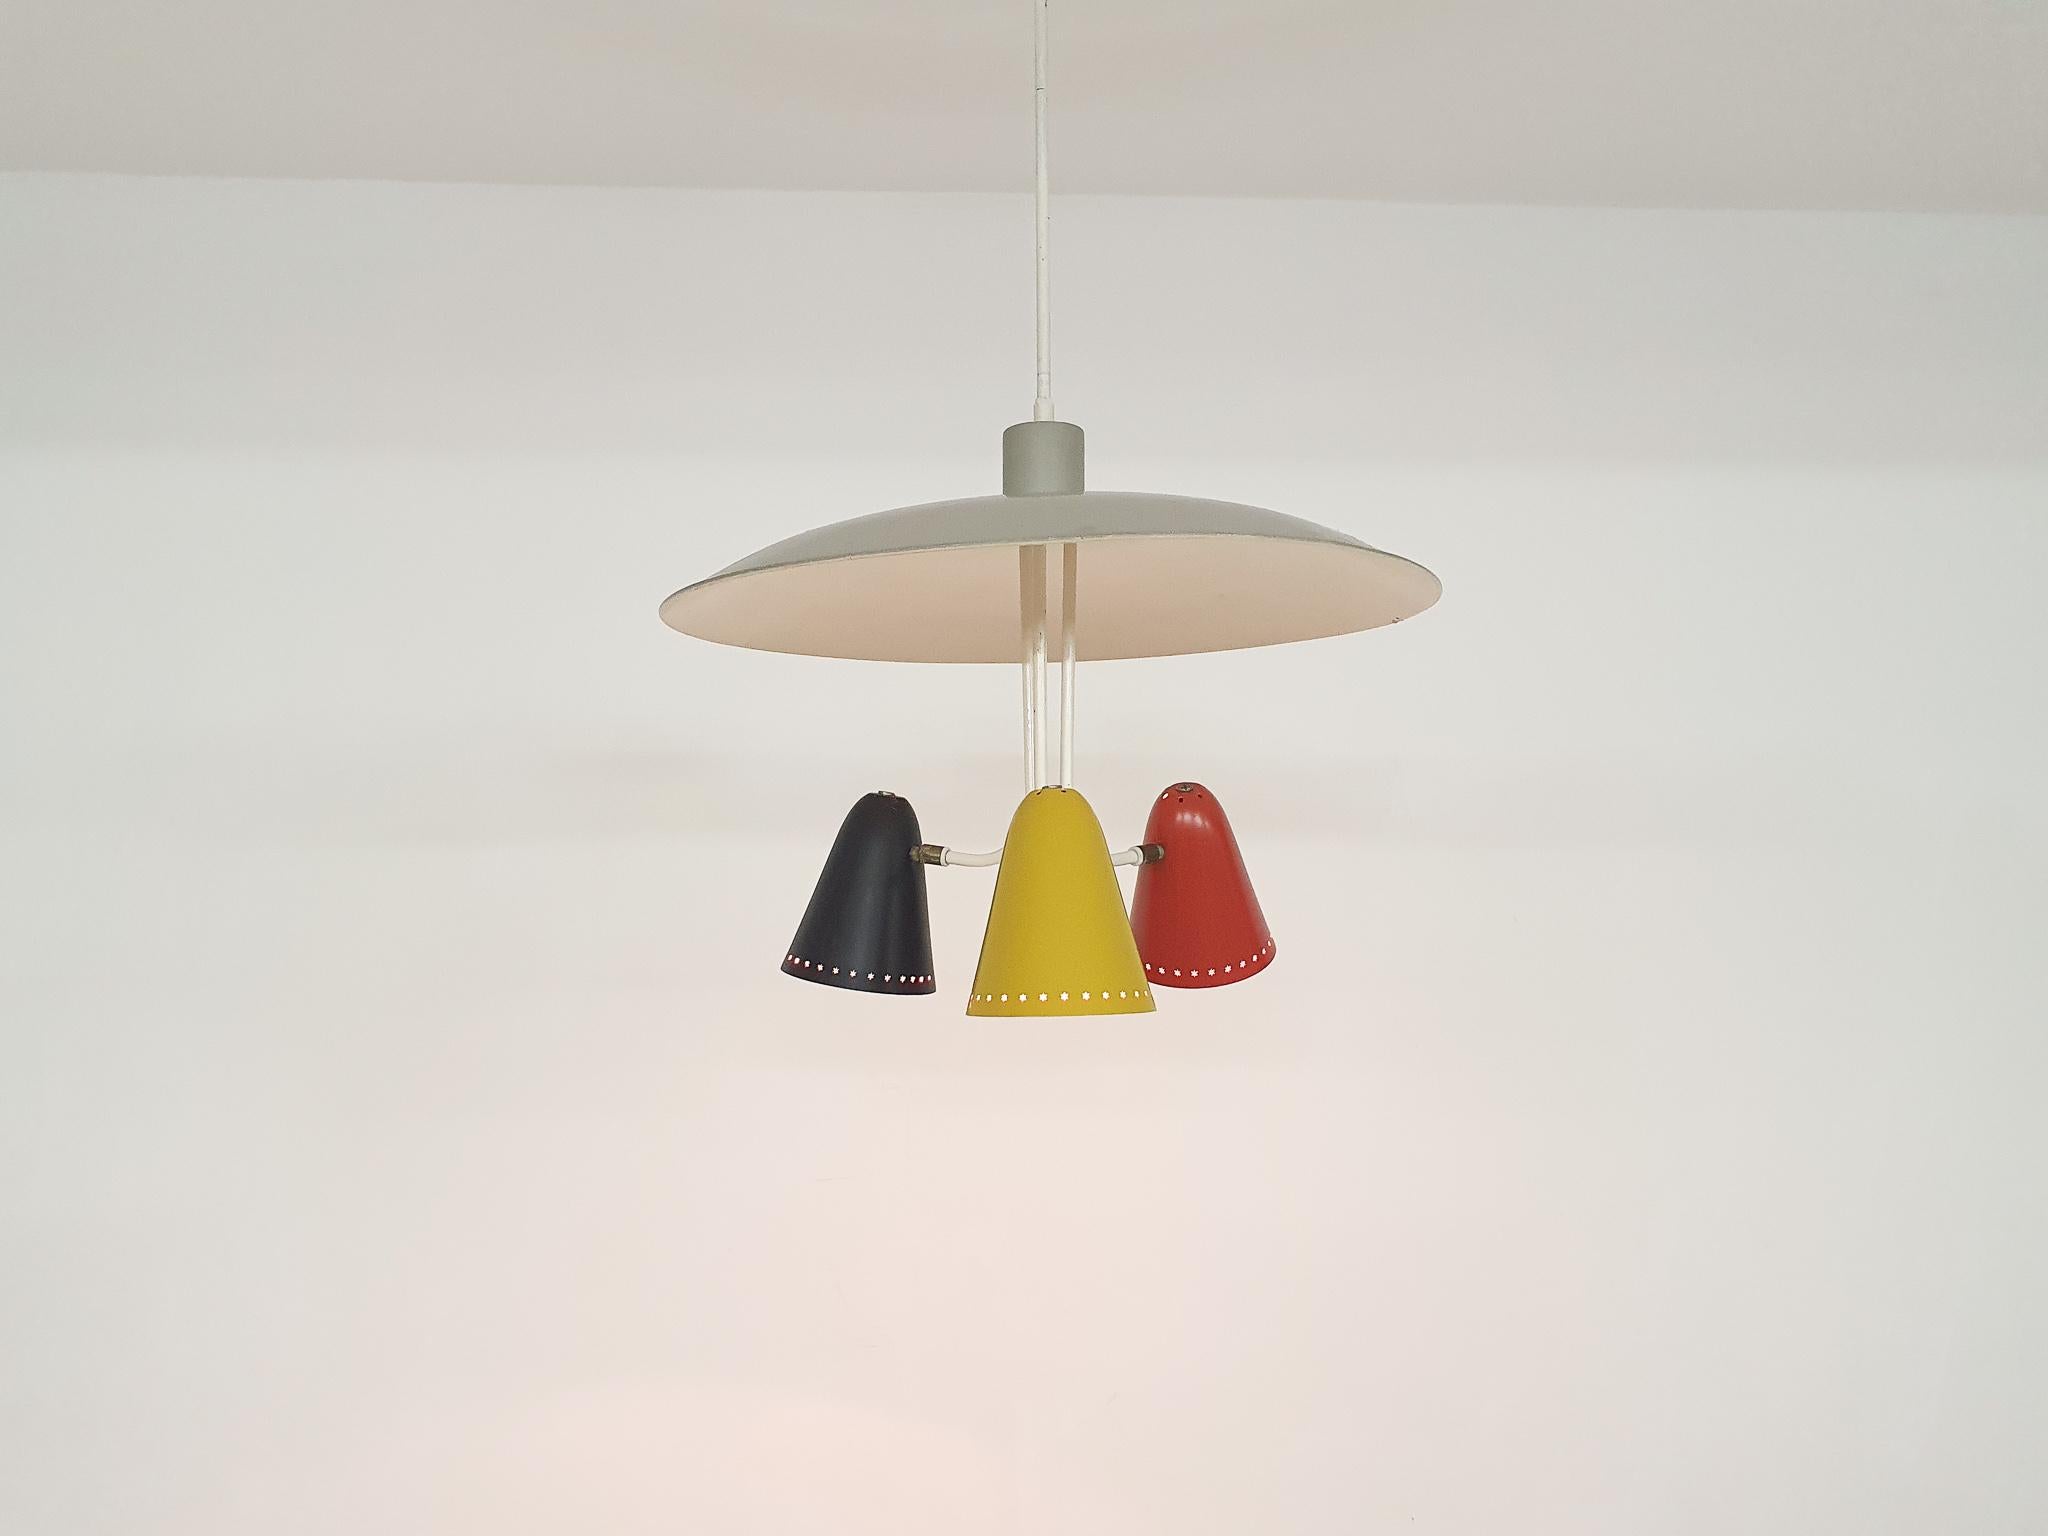 Metal pendant light. A grey scale with three metal lamp shades in yellow, red and black.
The lamp has been repainted in its original colors, and ahs new wiring.
The grey scale has some dents.